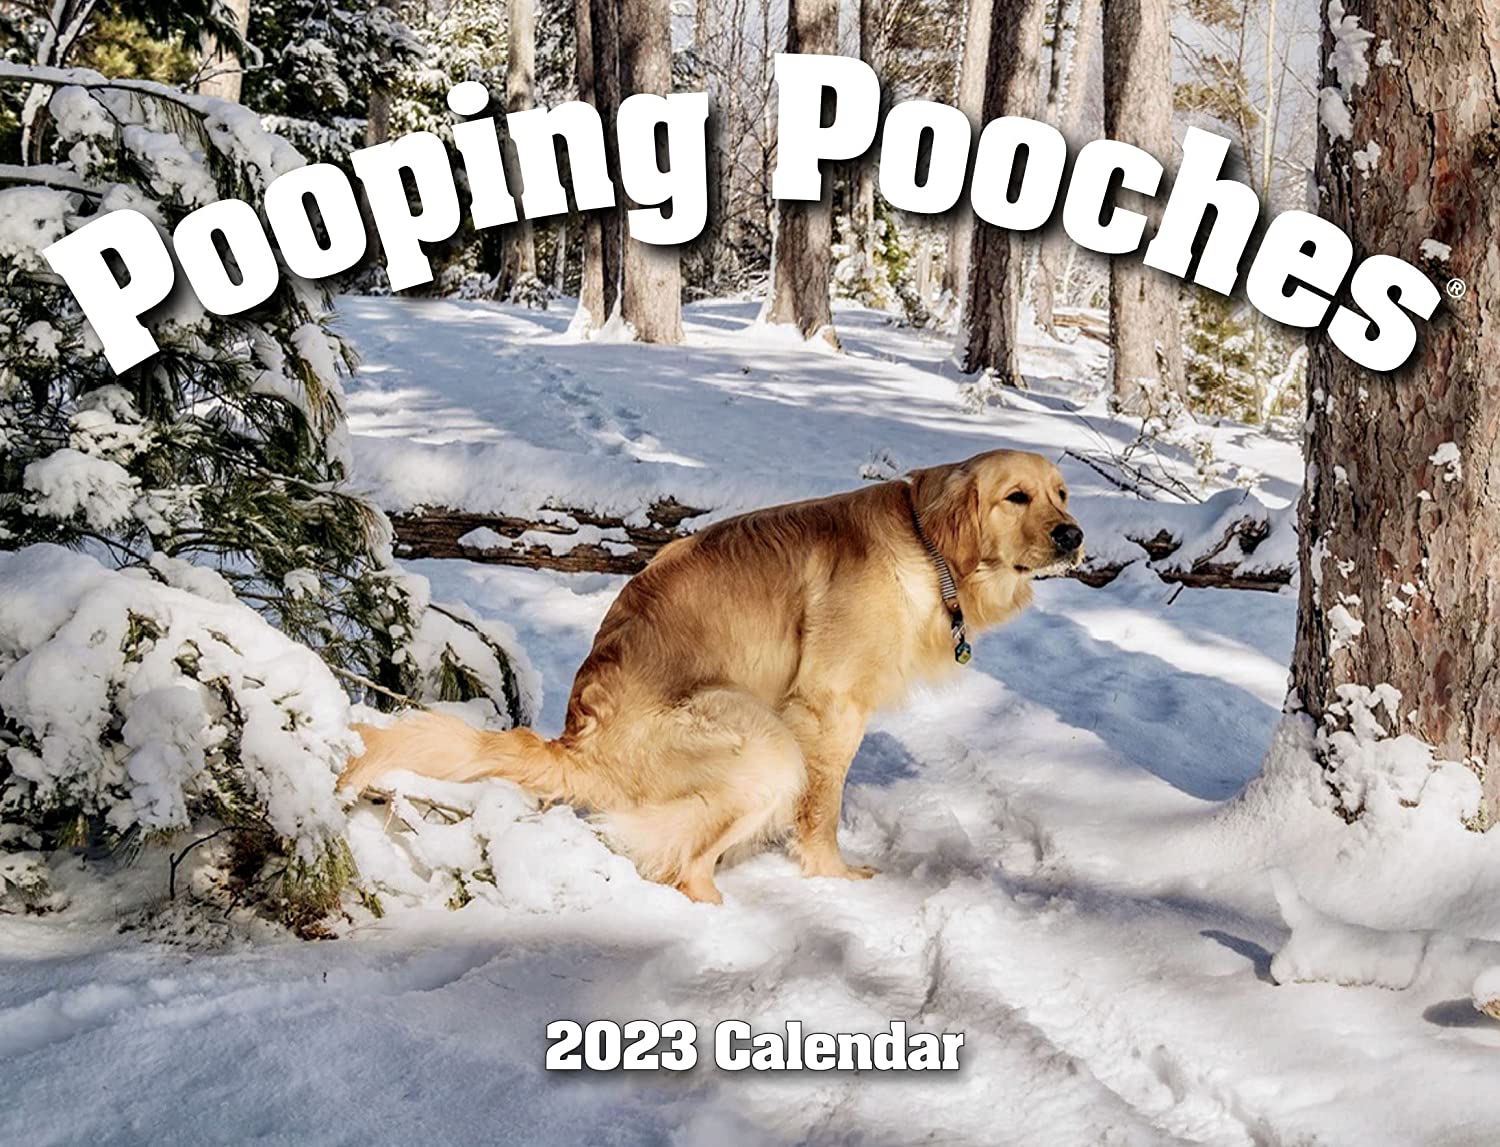 Pooping Pooches Calendar 2023 product image